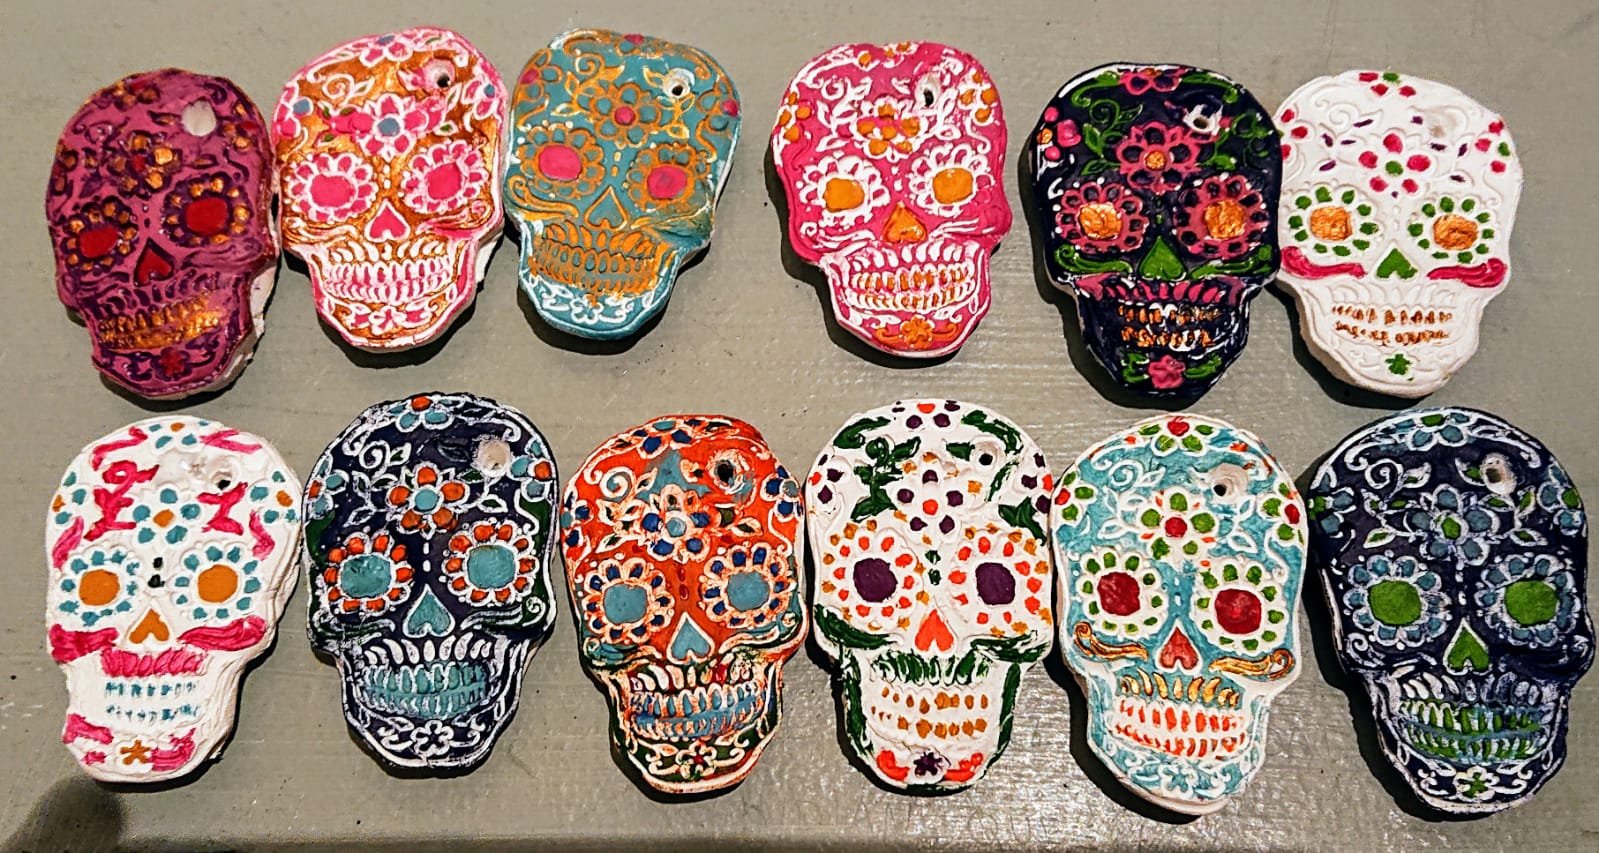 A row of ceramic skulls have been painted in different patterns.